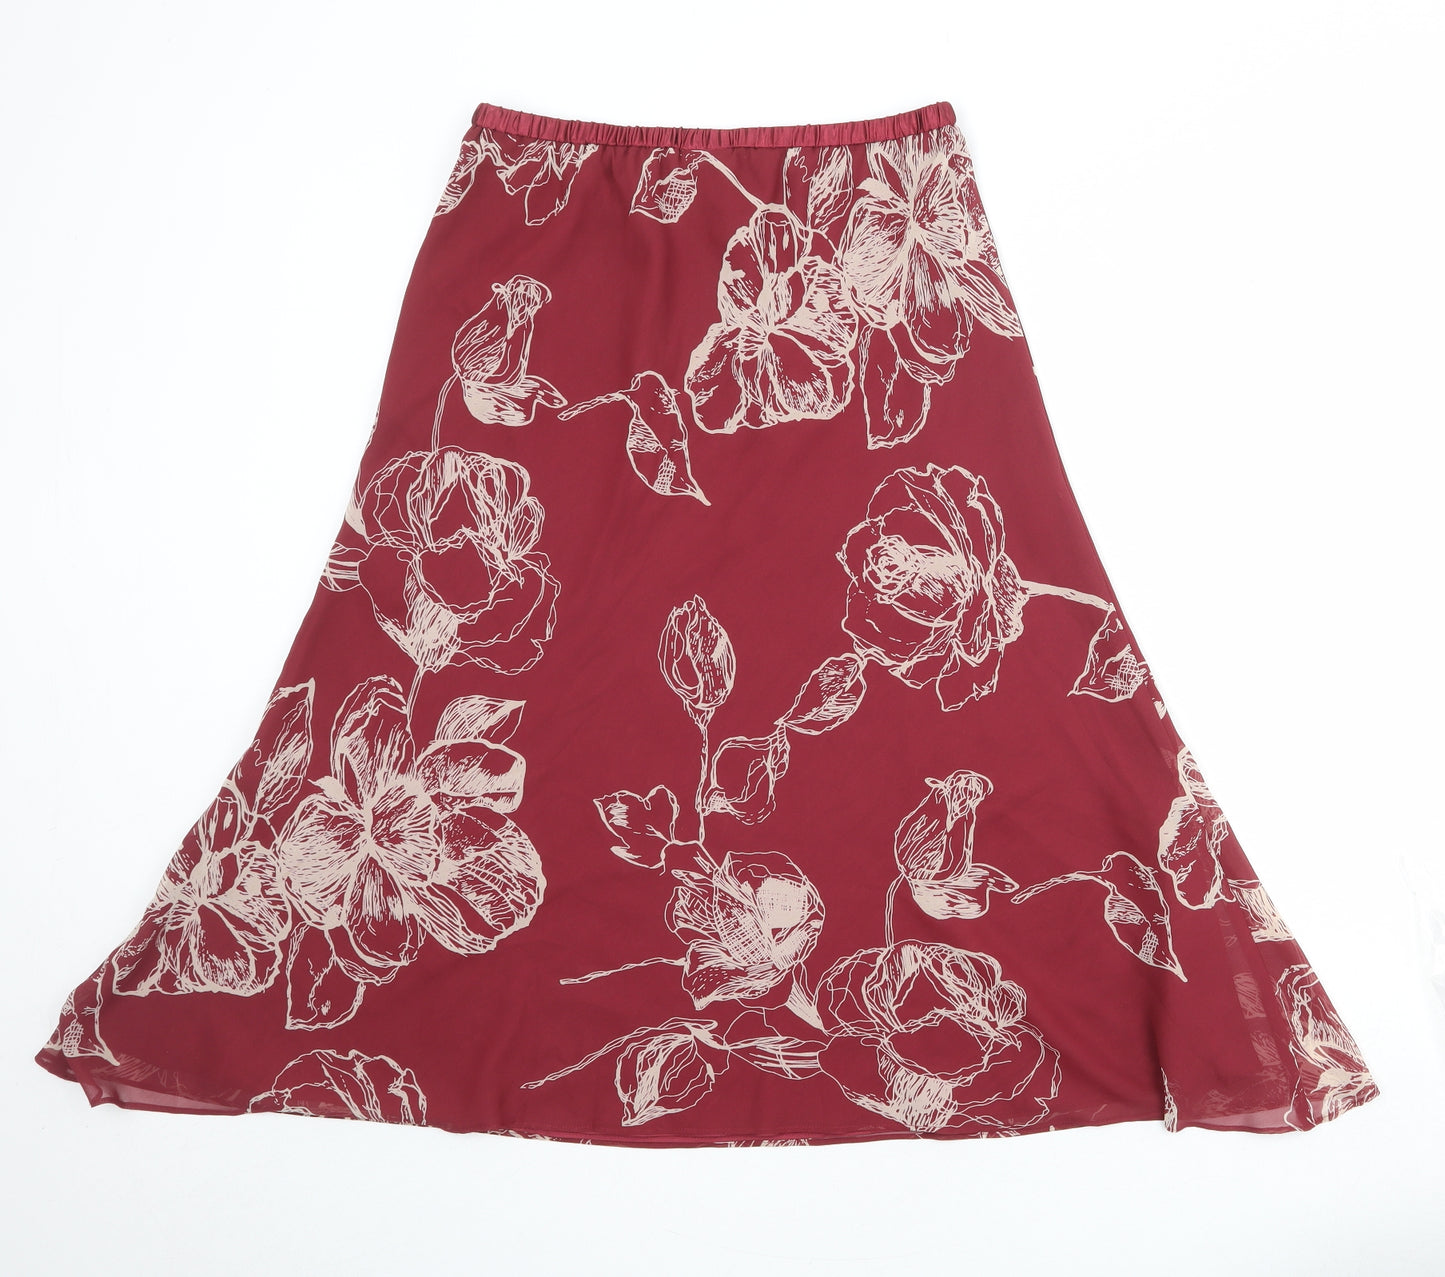 Jacques Vert Womens Red Floral Polyester Swing Skirt Size 12